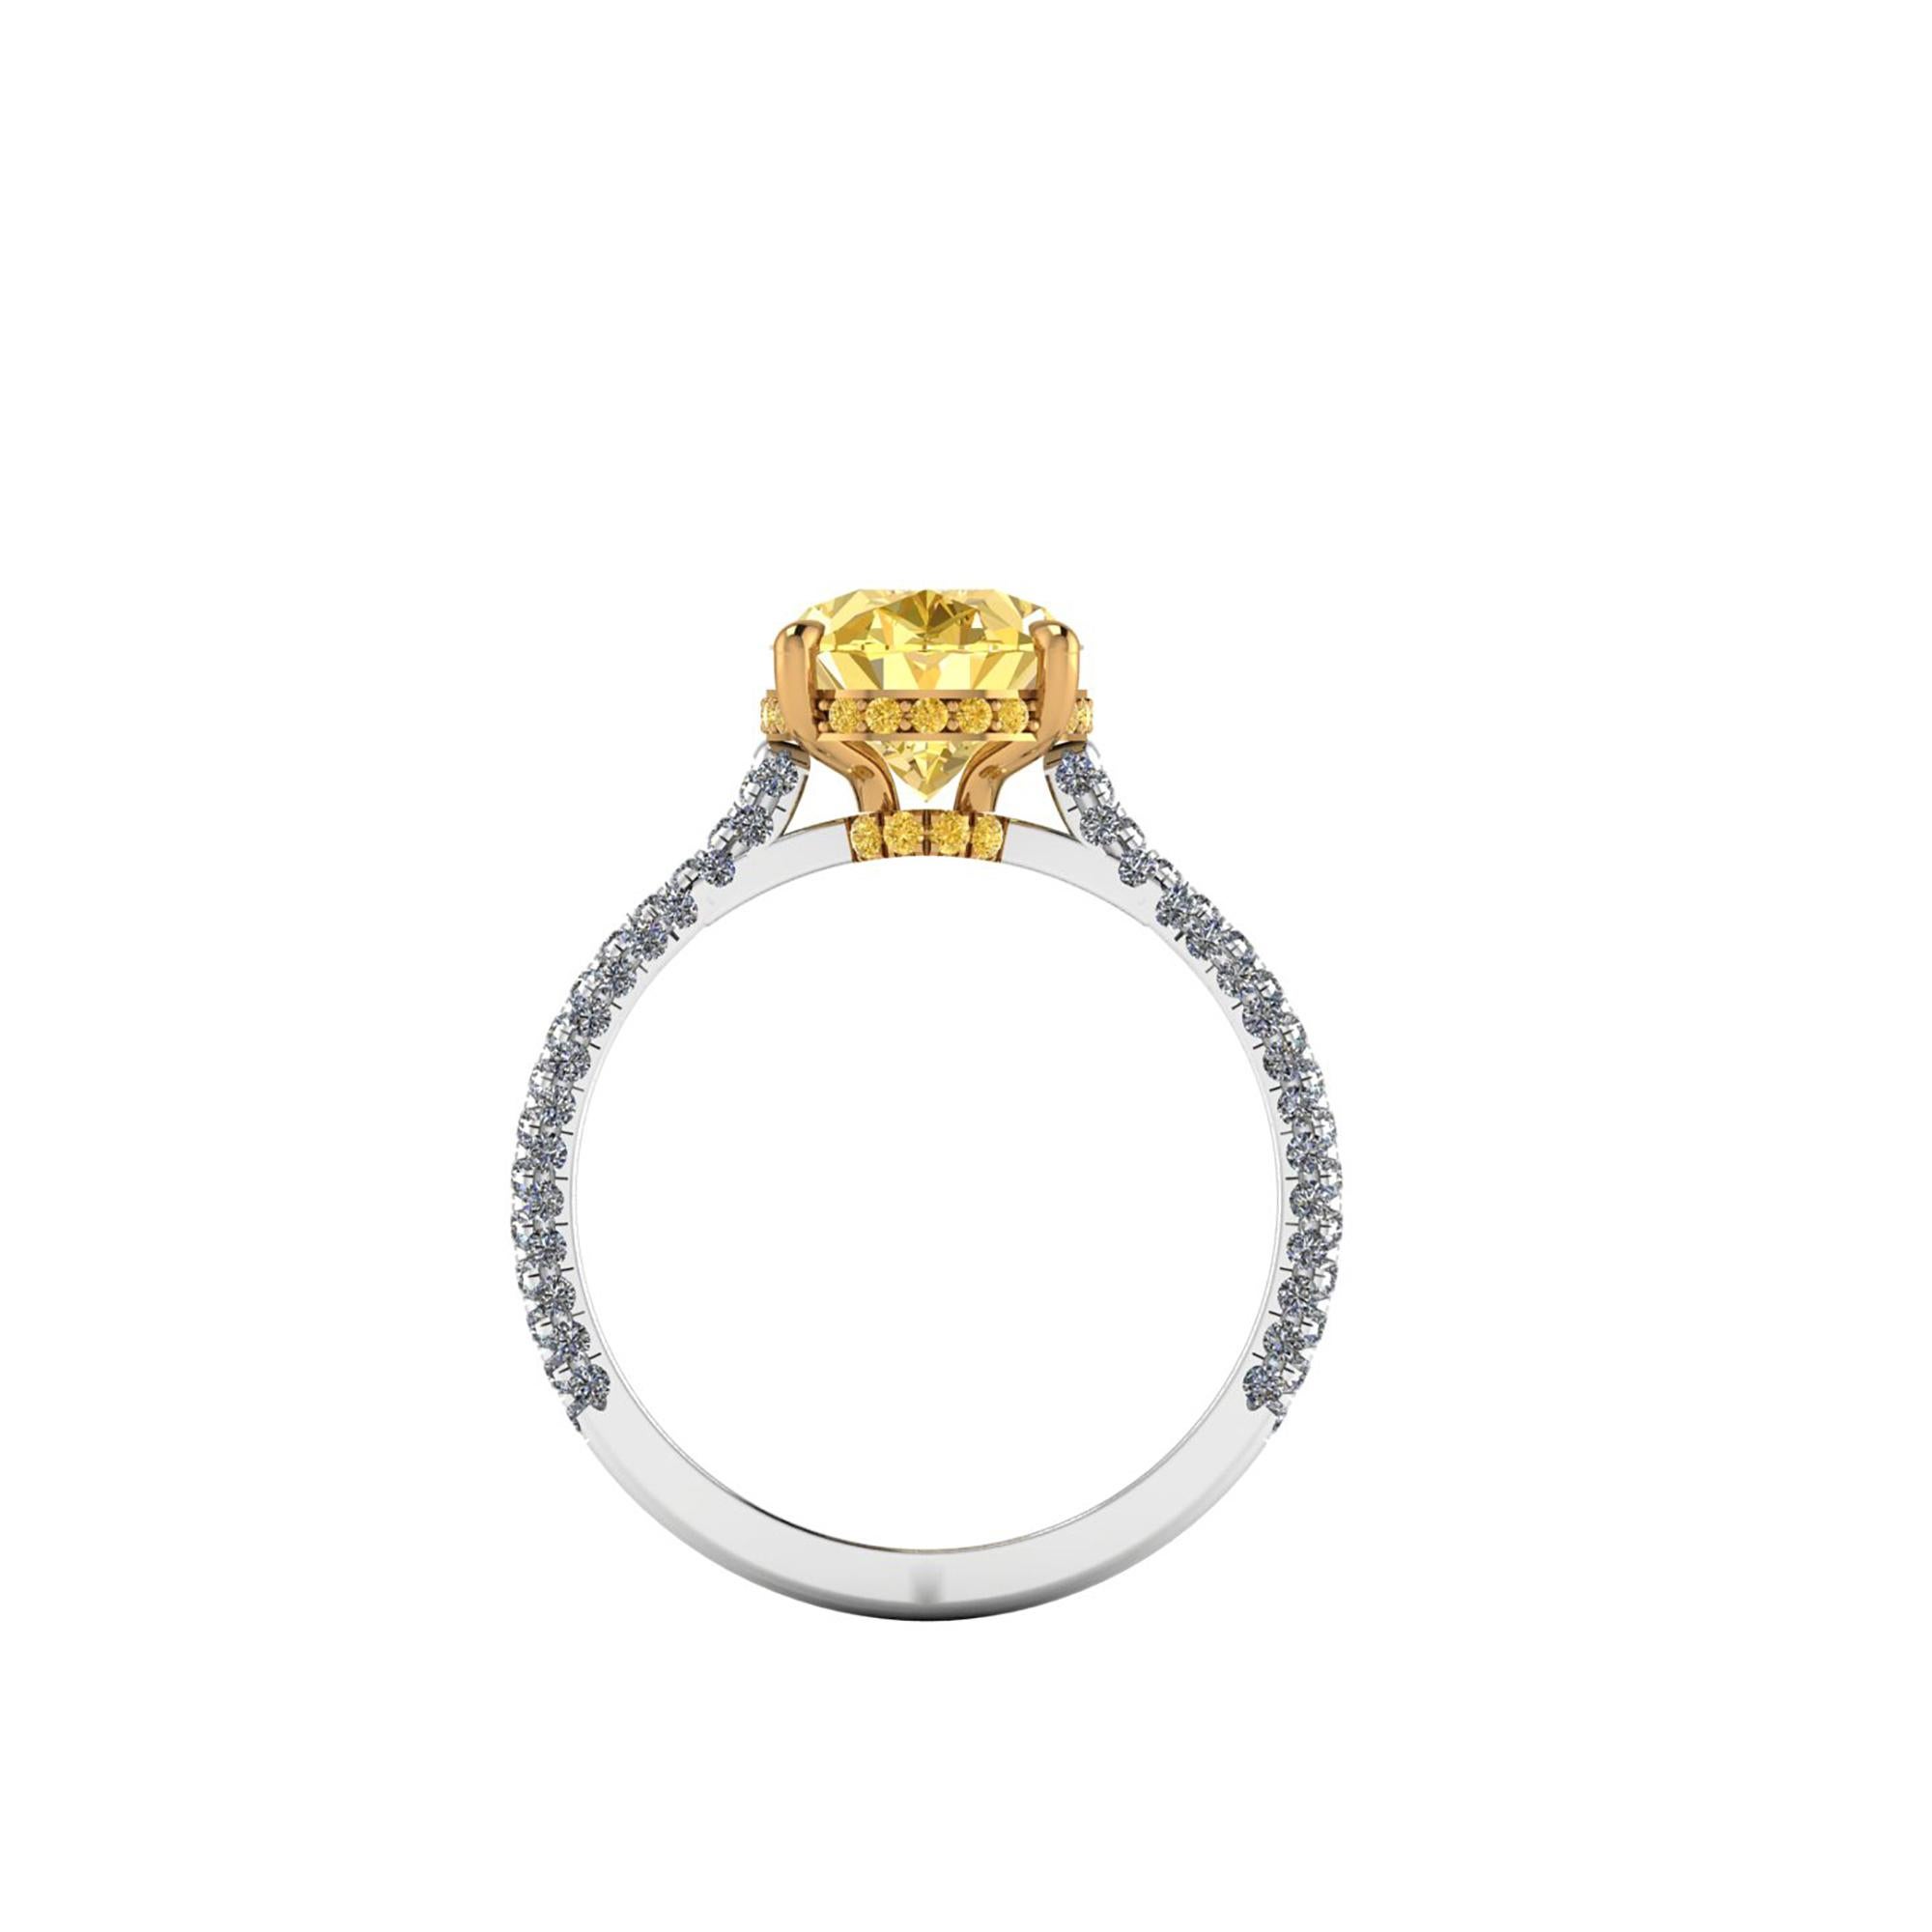 A very rare diamond in color and beauty, GIA Certified 3.09 carat Oval Fancy Deep Yellow diamond with No Fluorescence, a rare and valuable diamond, set on a Platinum 950 and 18k Yellow gold ring, designed and hand made in New York adorned by yellow